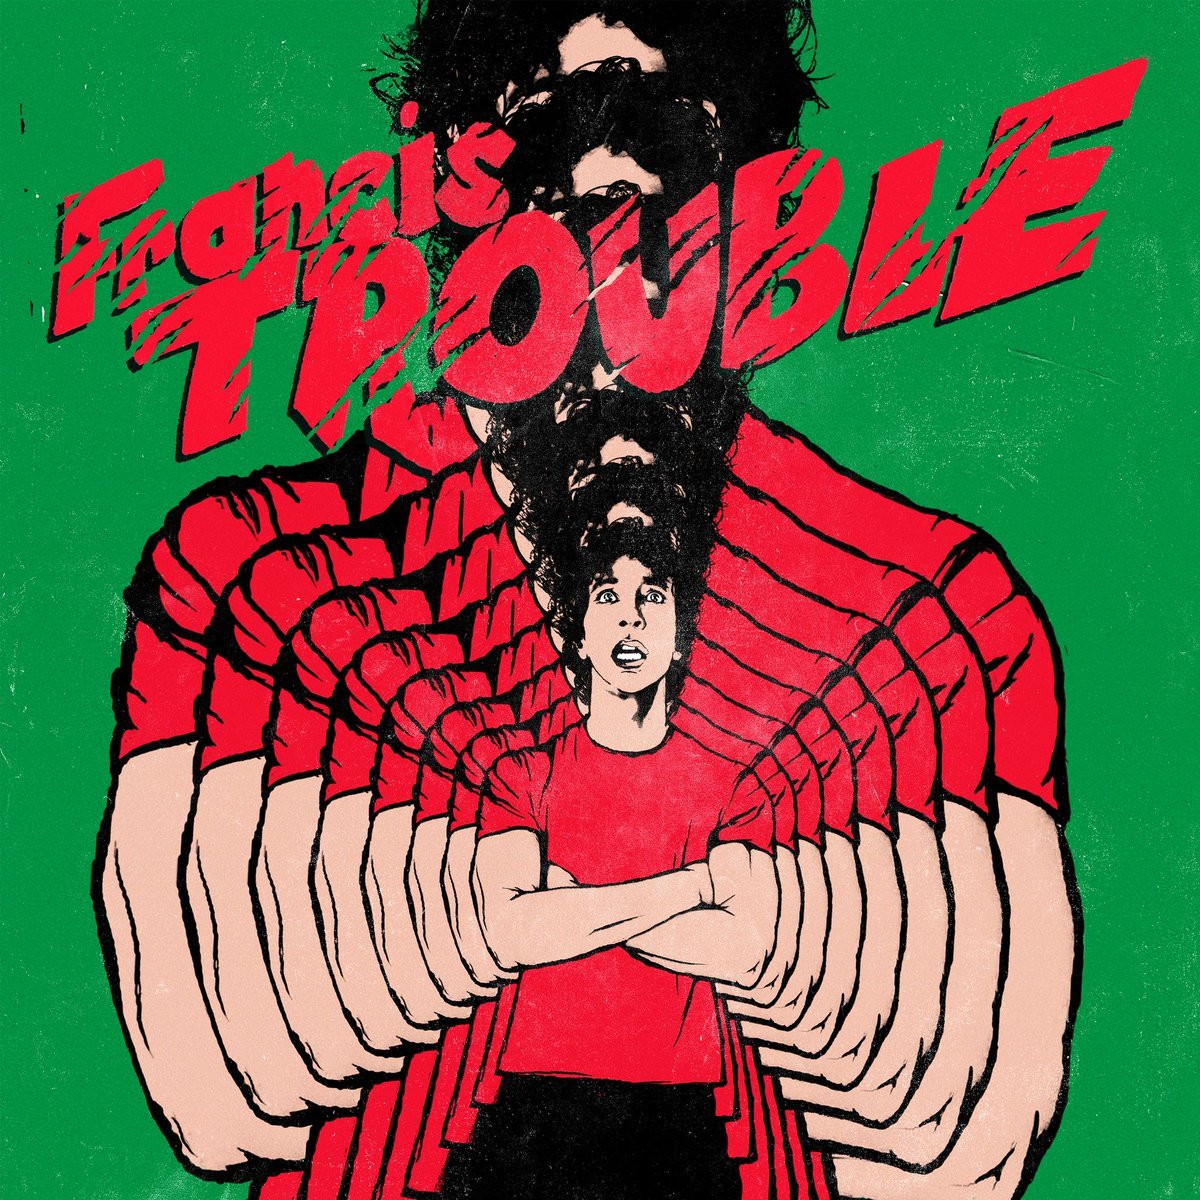 Albert Hammond Jr. Announces New Album <i></noscript>Francis Trouble</i>, Releases “Muted Beatings”” title=”albert-hammond-jr-francis-trouble-1517583158″ data-original-id=”277117″ data-adjusted-id=”277117″ class=”sm_size_full_width sm_alignment_center ” data-image-source=”free_stock” />
<p><strong>Albert Hammond Jr., <em>Francis Trouble </em>track list<br />
</strong>1. “DVSL”<br />
2. “Far Away Truths”<br />
3. “Muted Beatings”<br />
4. “Set to Attack”<br />
5. “Tea for Two”<br />
6. “Stop and Go”<br />
7. “Screamer”<br />
8. “Rocky’s Late Night”<br />
9. “Strangers”<br />
10. “Harder, Harder, Harder”</p>
</p> </div>
</div>
</div>
</div>
</div>
</section>
<section data-particle_enable=